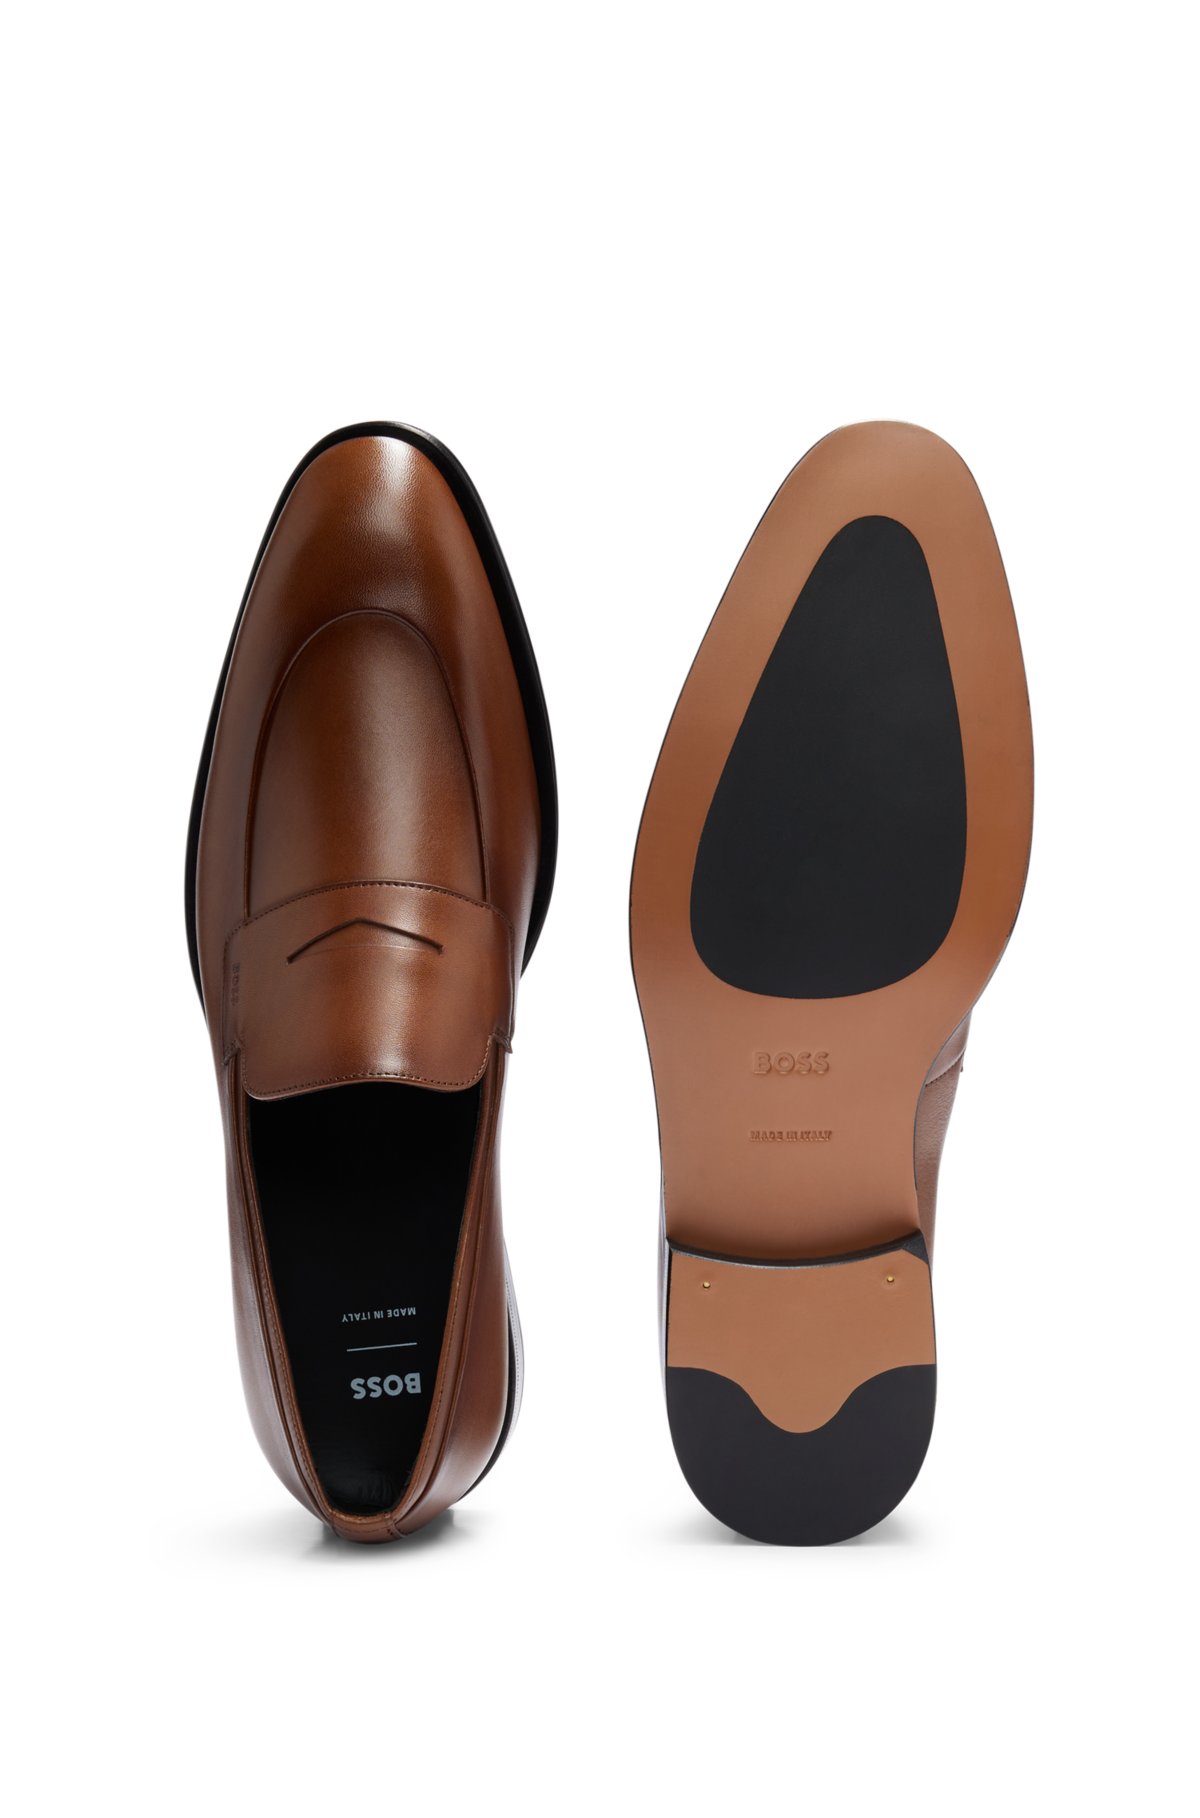 ② Chaussures Hugo Boss (Mocassins pour hommes) — Chaussures